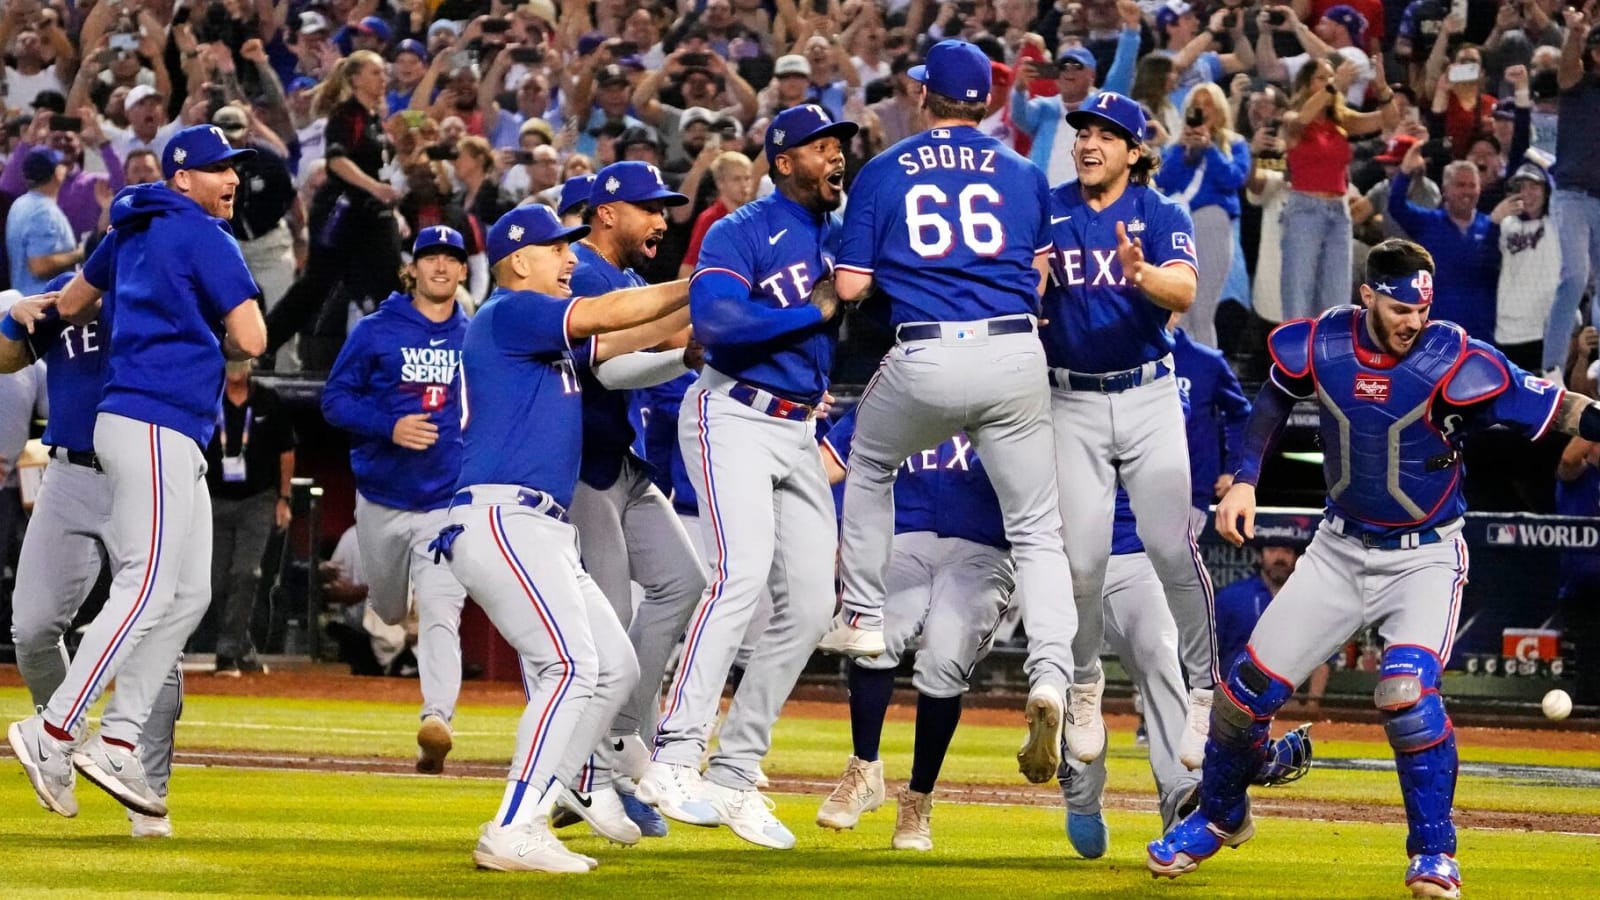 Rangers congratulated by their good luck charm after World Series win